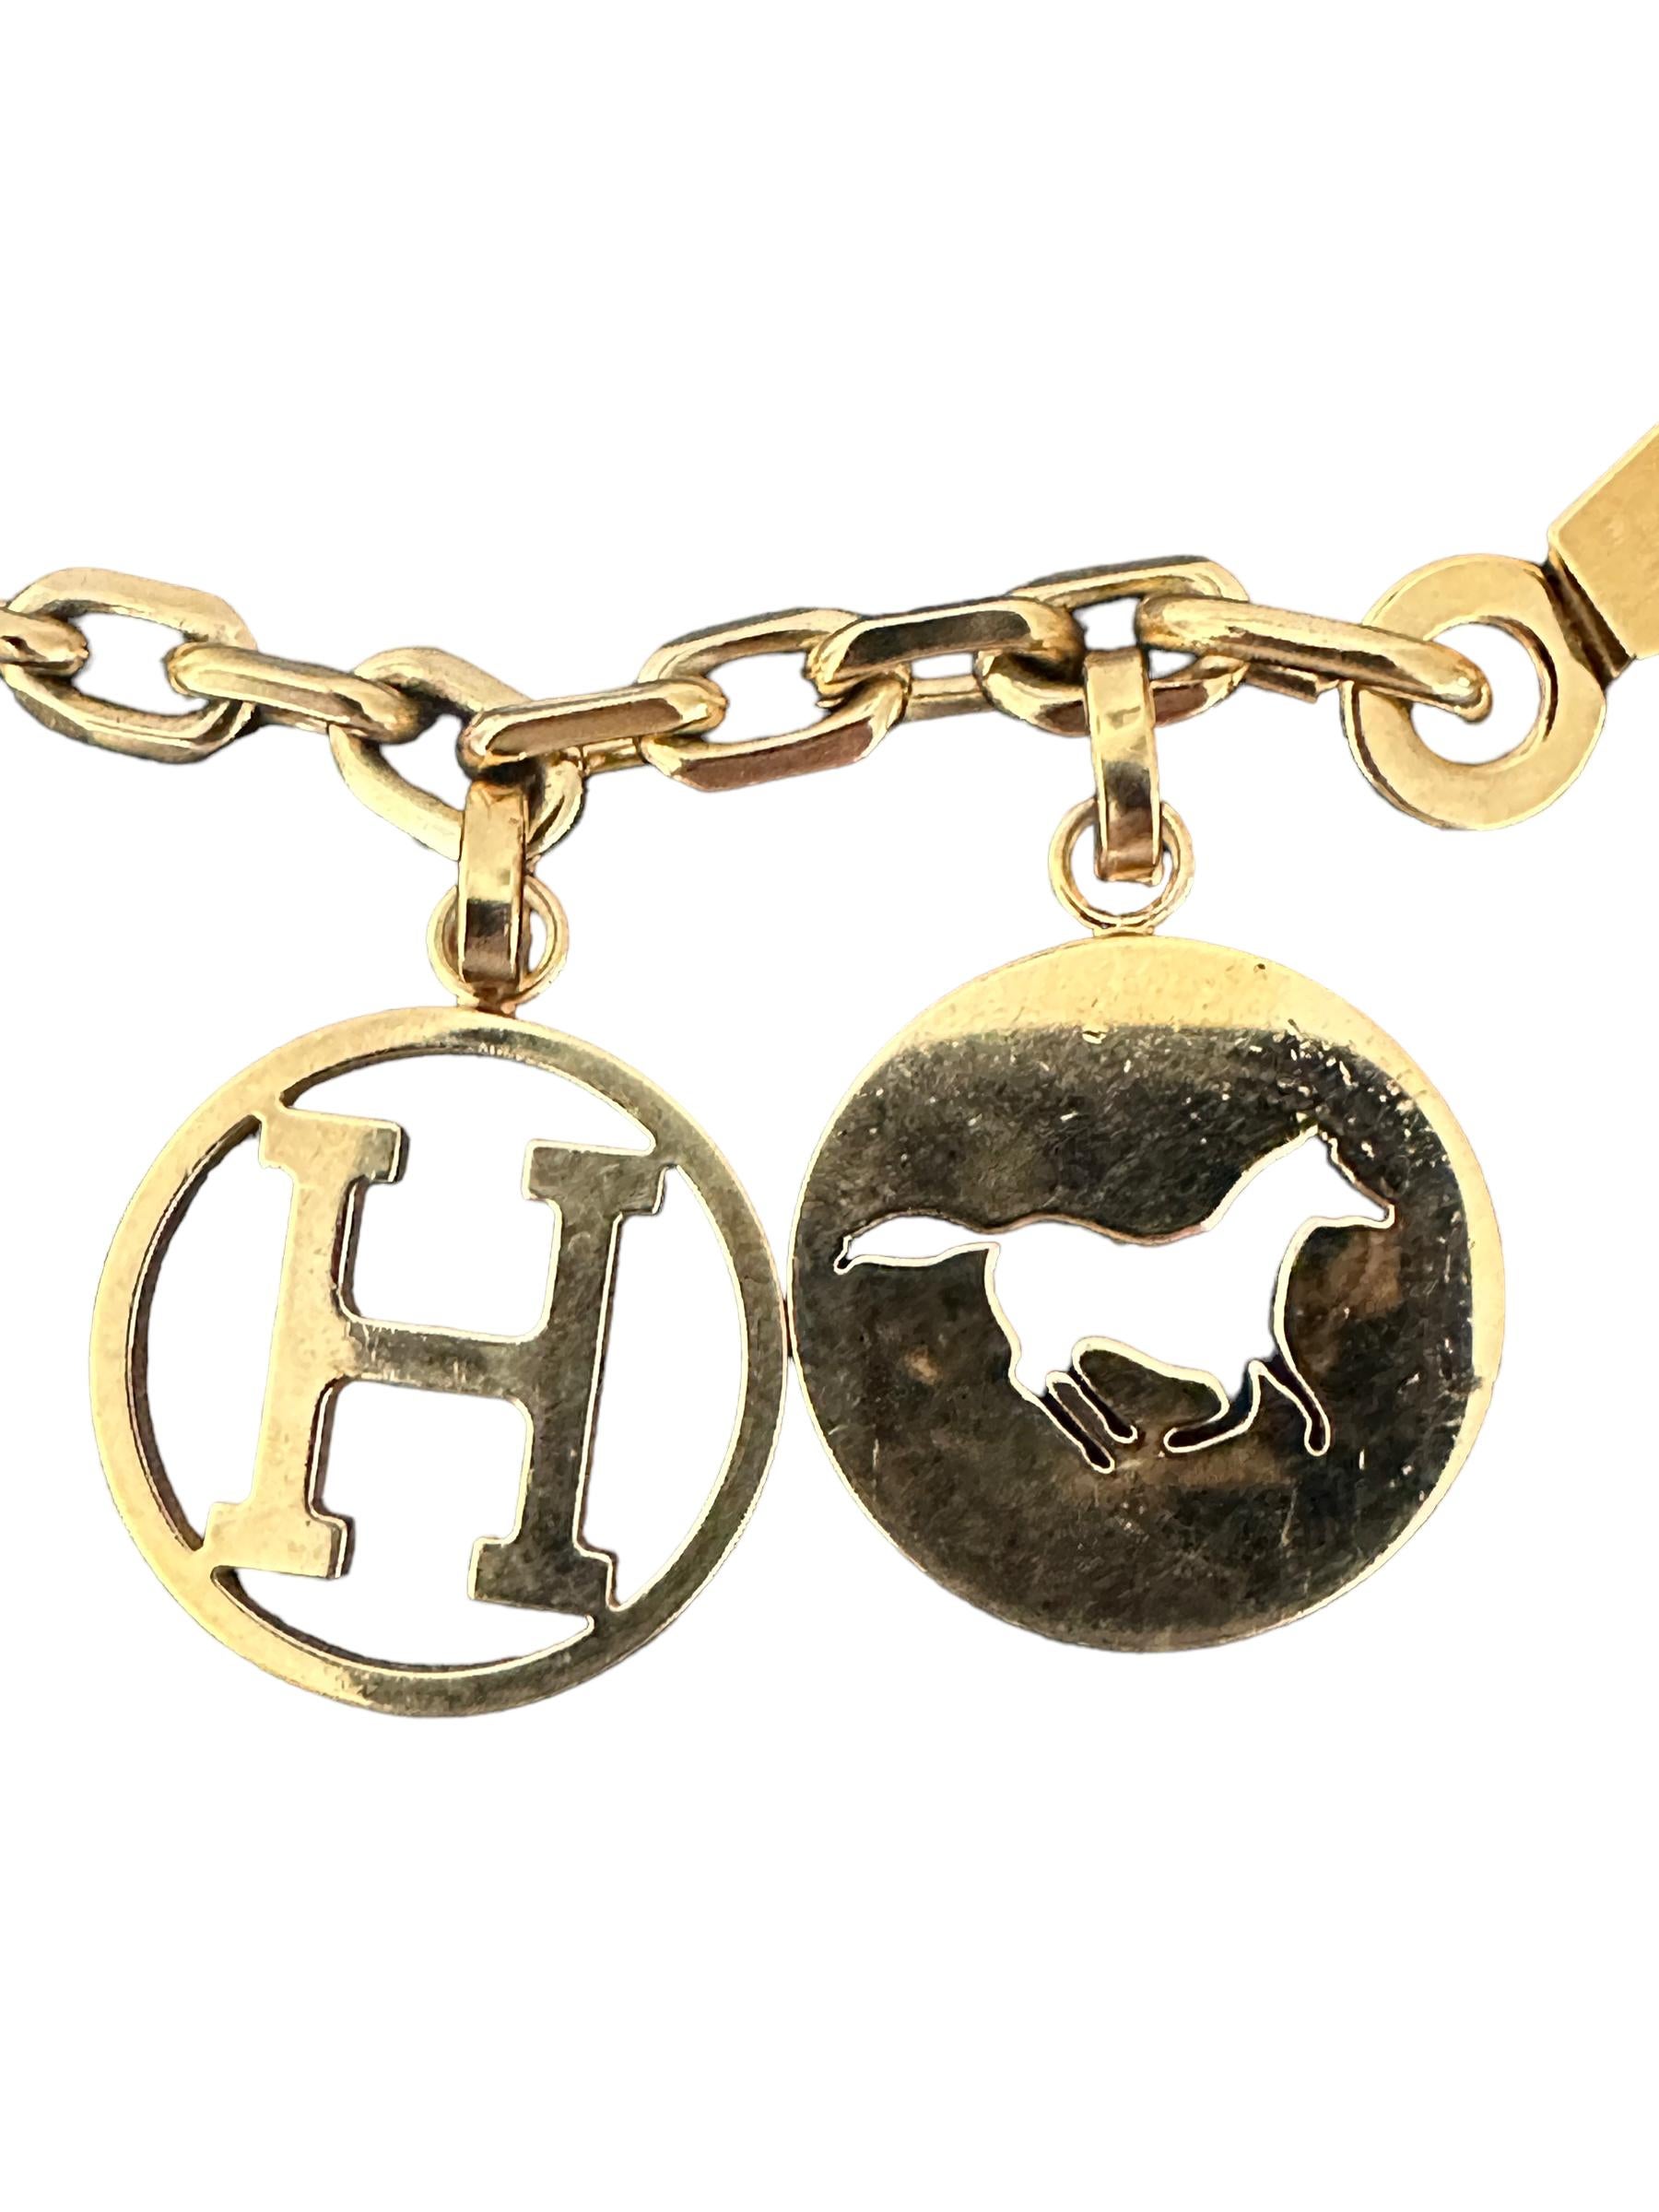 Hermes Gold Breloque Dog Horse H  Bag Charm for Birkin or Kelly

Long discontinued and iconic silver bag charm by Hermes.
Goes beautifully on your Kelly or Birkin
Make your bag standout!
Beloved and coveted, this adorable charm features the iconic